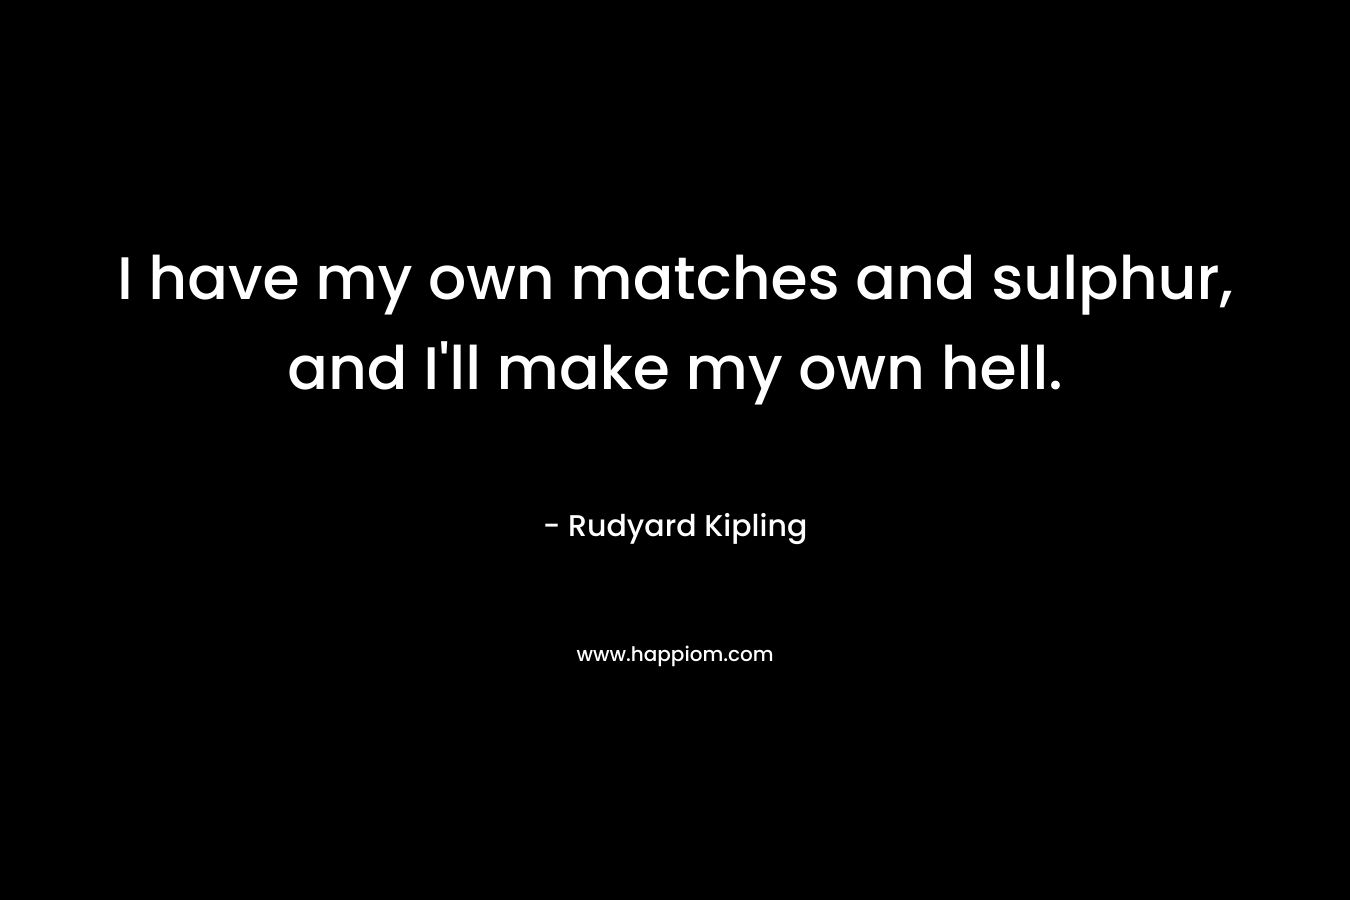 I have my own matches and sulphur, and I’ll make my own hell. – Rudyard Kipling